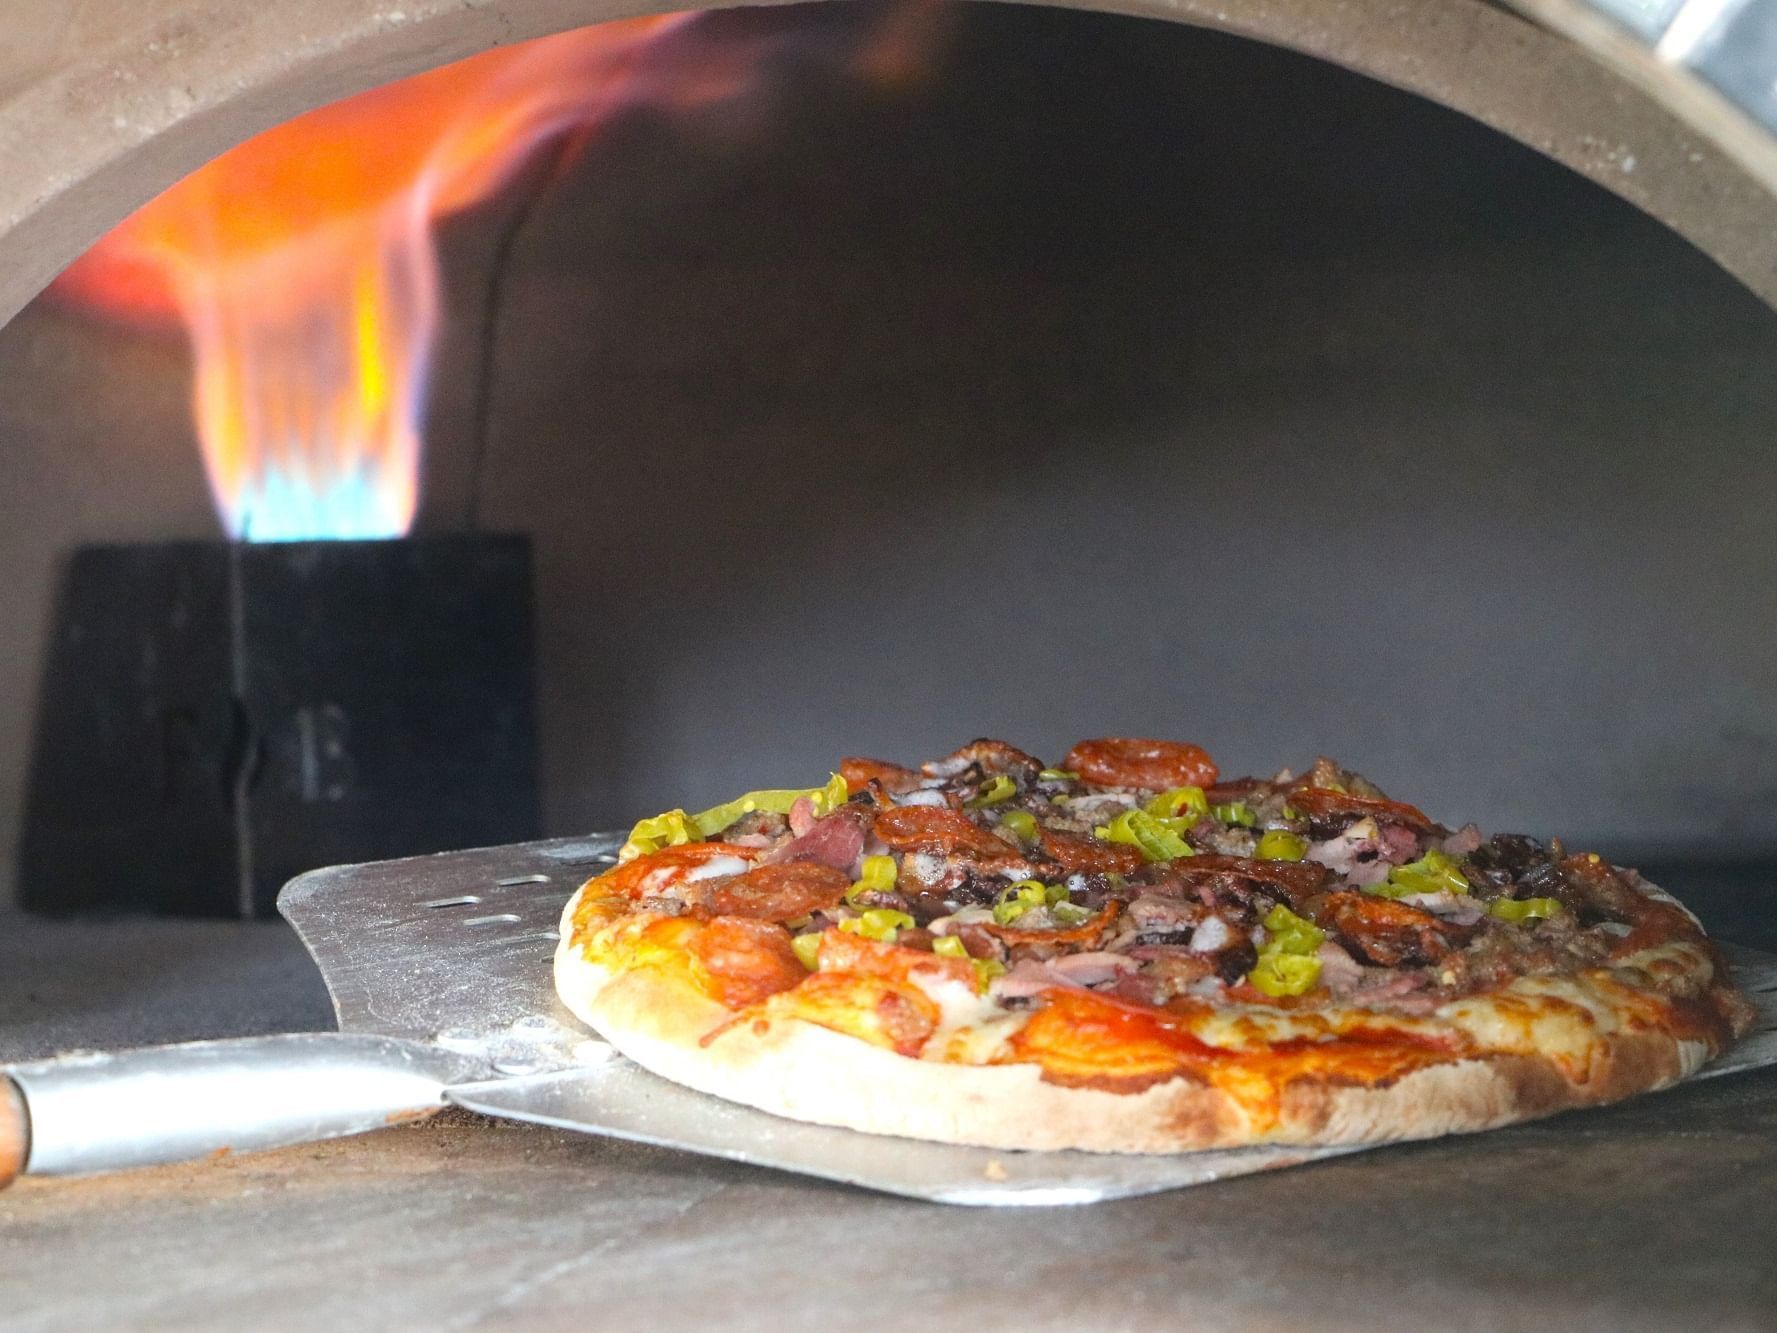 Wood fired oven pizza with a crispy finish from licking flames at Alaia Belize Autograph Collection